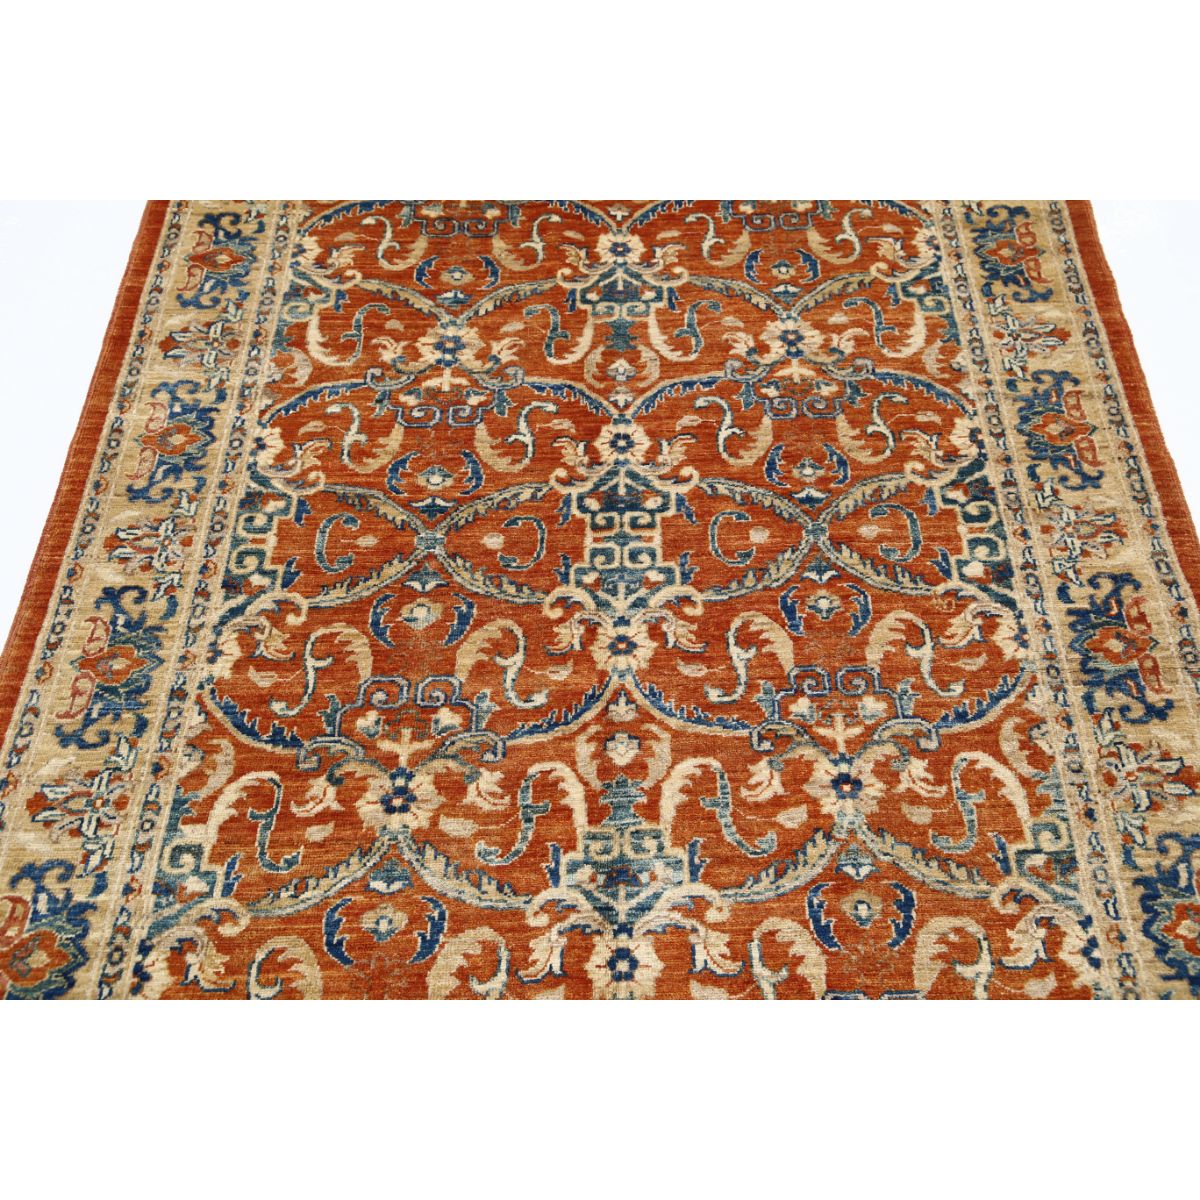 Ziegler 4'6" X 6'3" Wool Hand-Knotted Rug